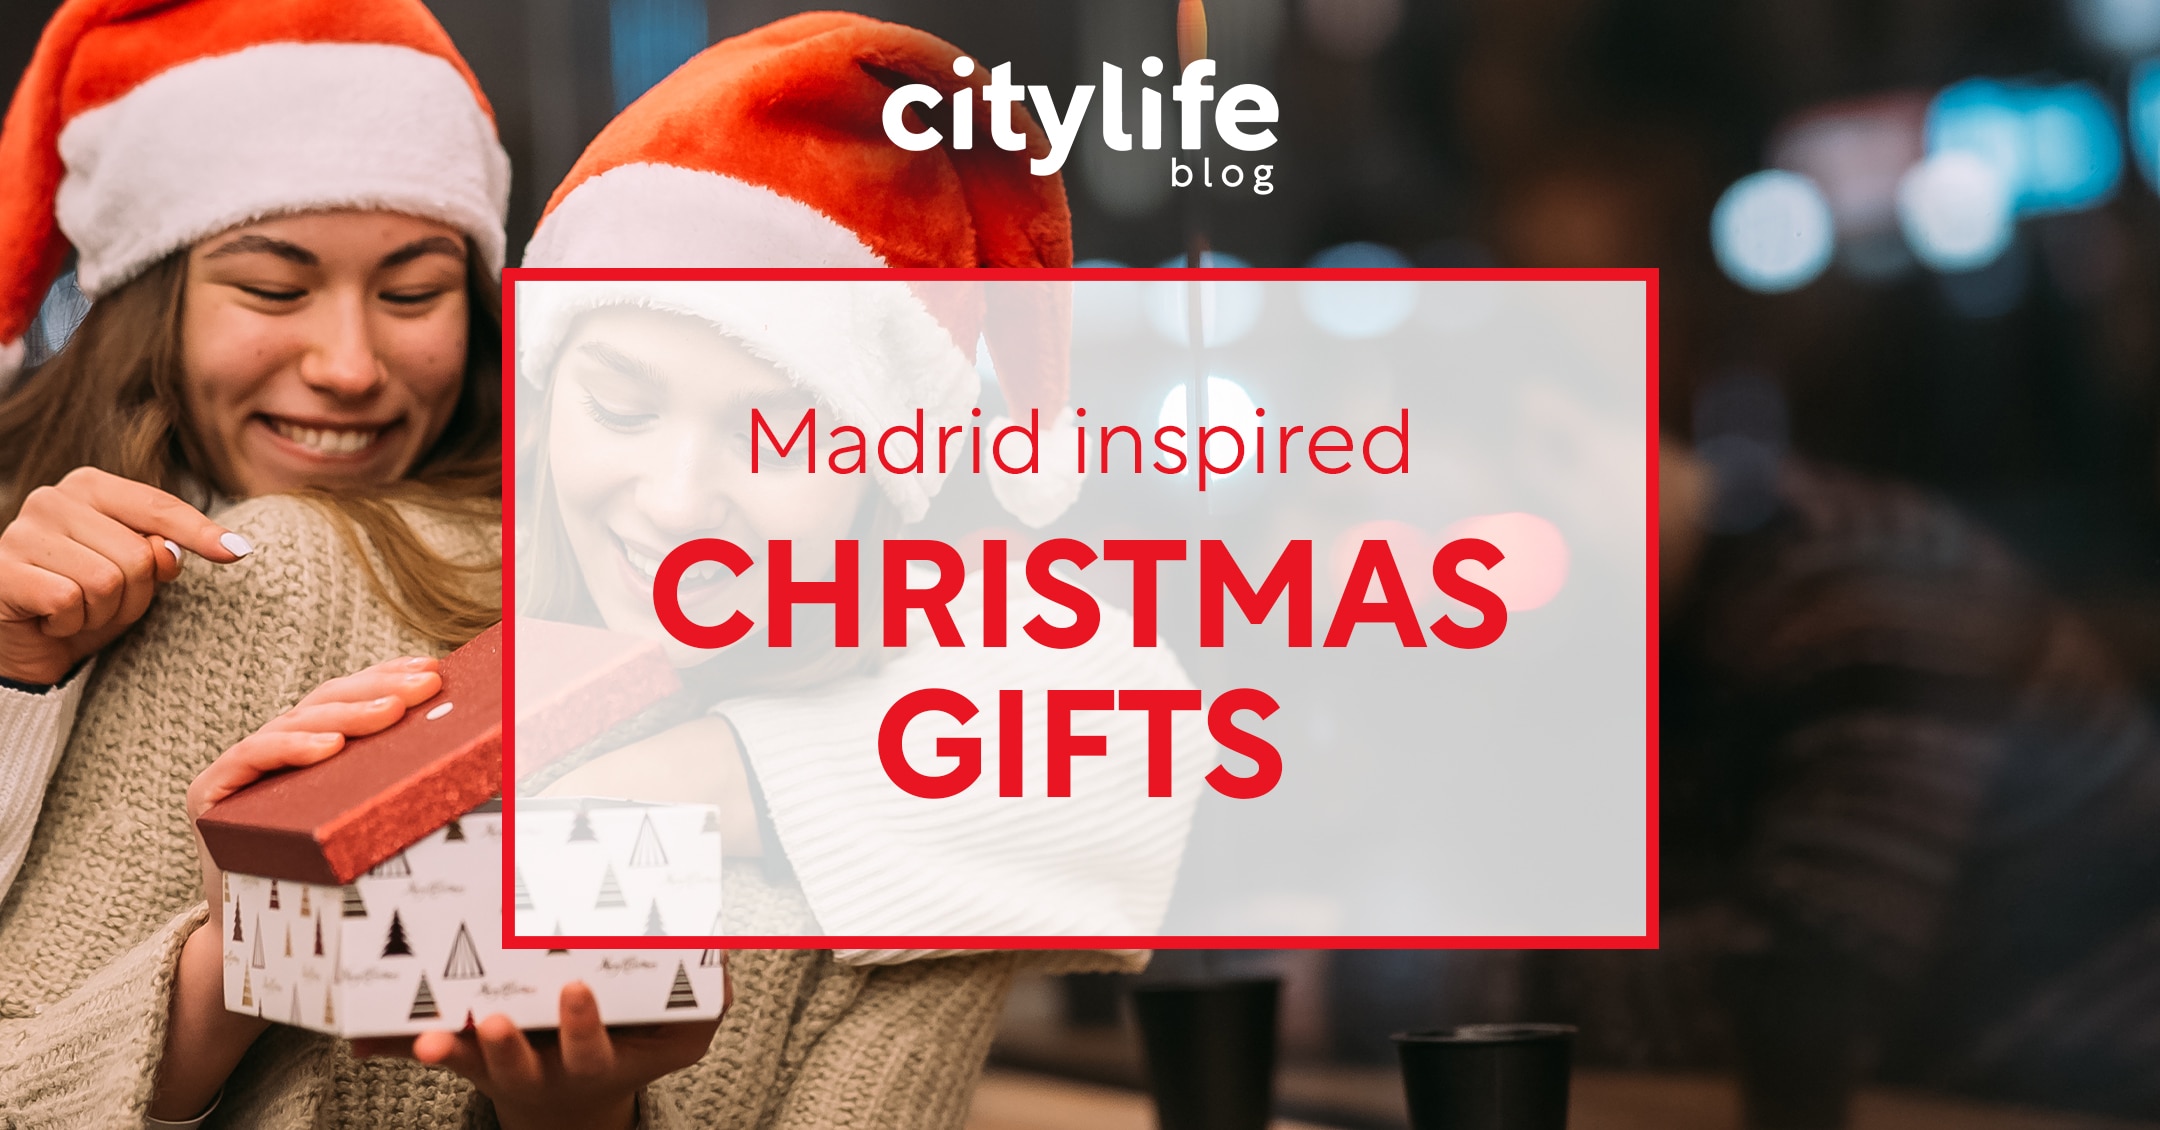 featured-image-christmas-gifts-citylife-madrid